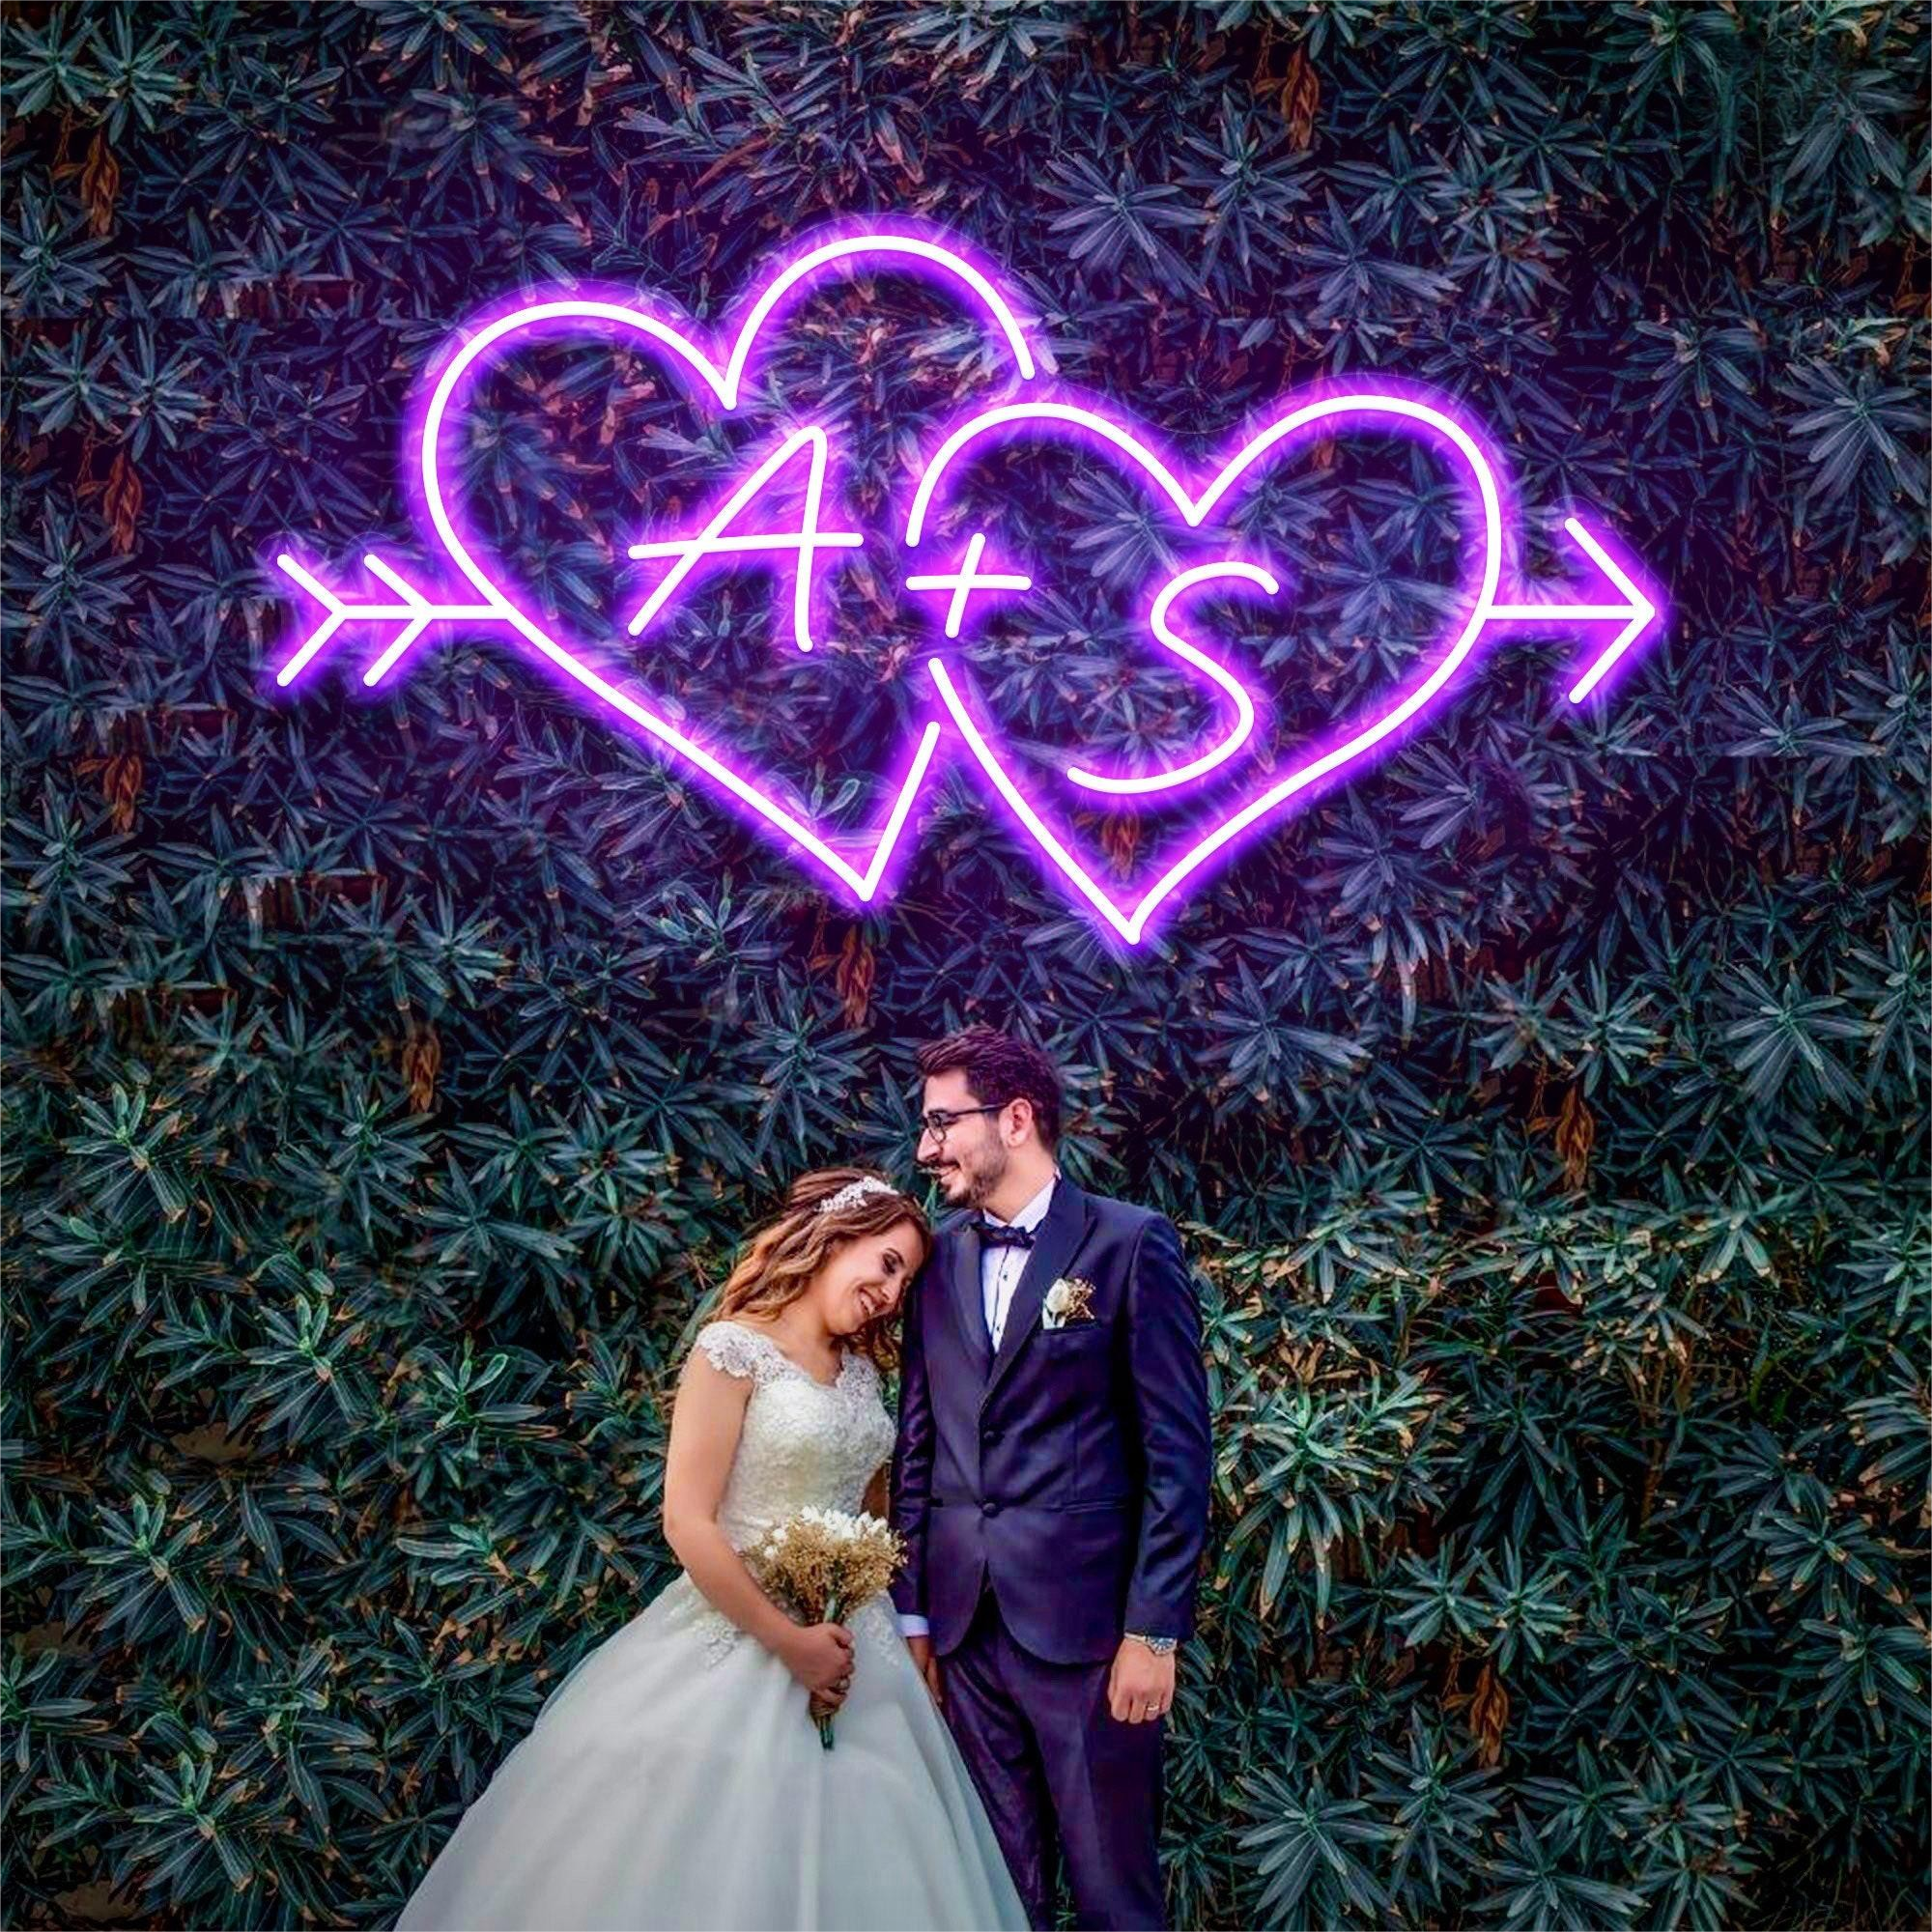 NEONIP-Personalized 100% Handmade Wedding LED Neon Sign with Cupid's Arrow and Your Initial Letters